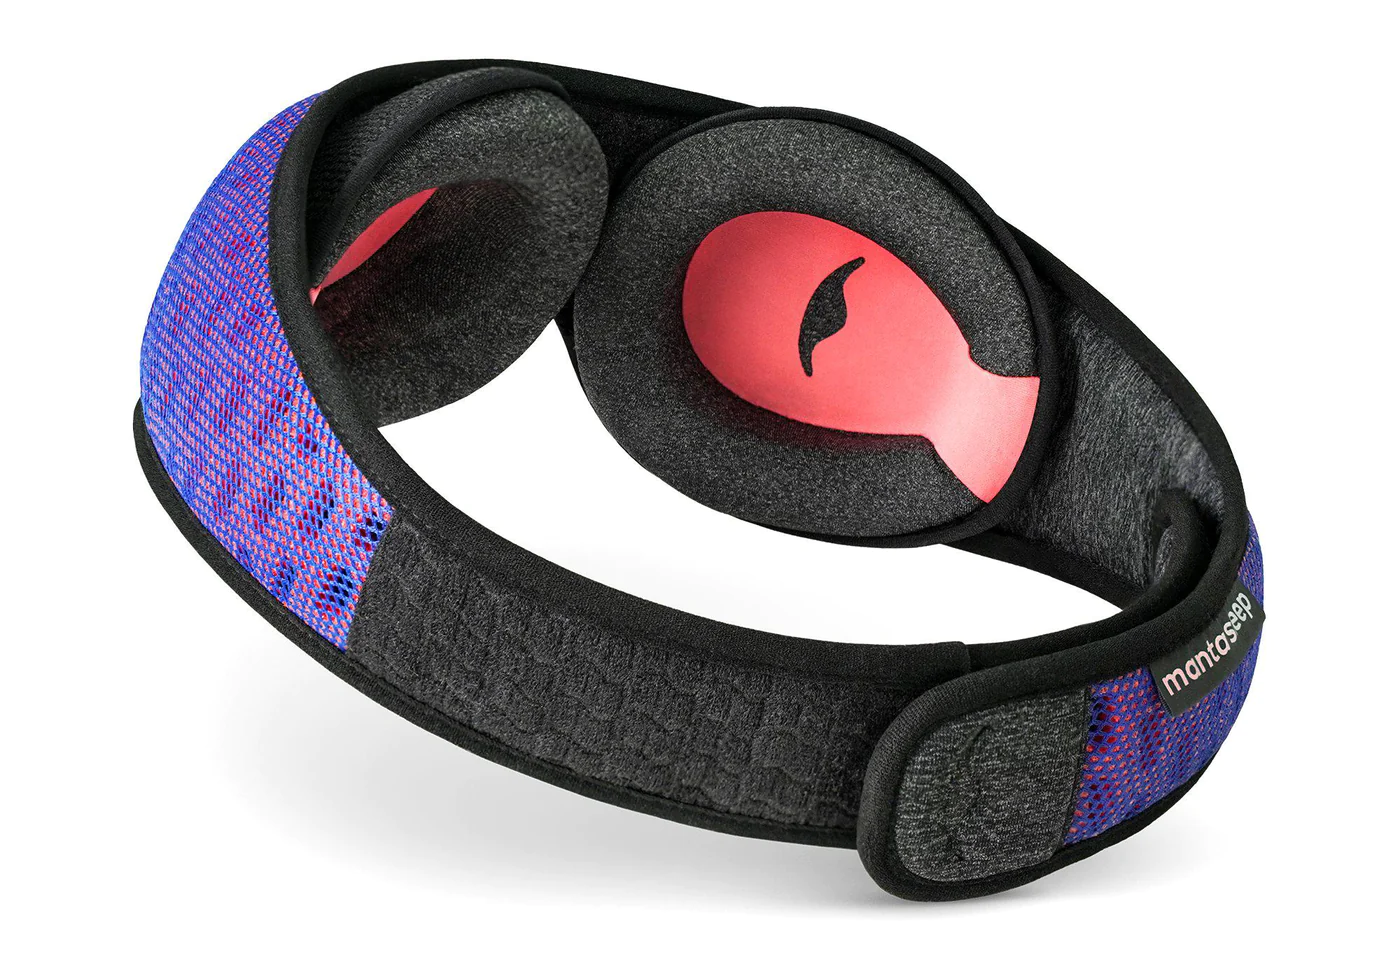 The interior of a blue mesh sleep mask with detachable black and red eye cups.